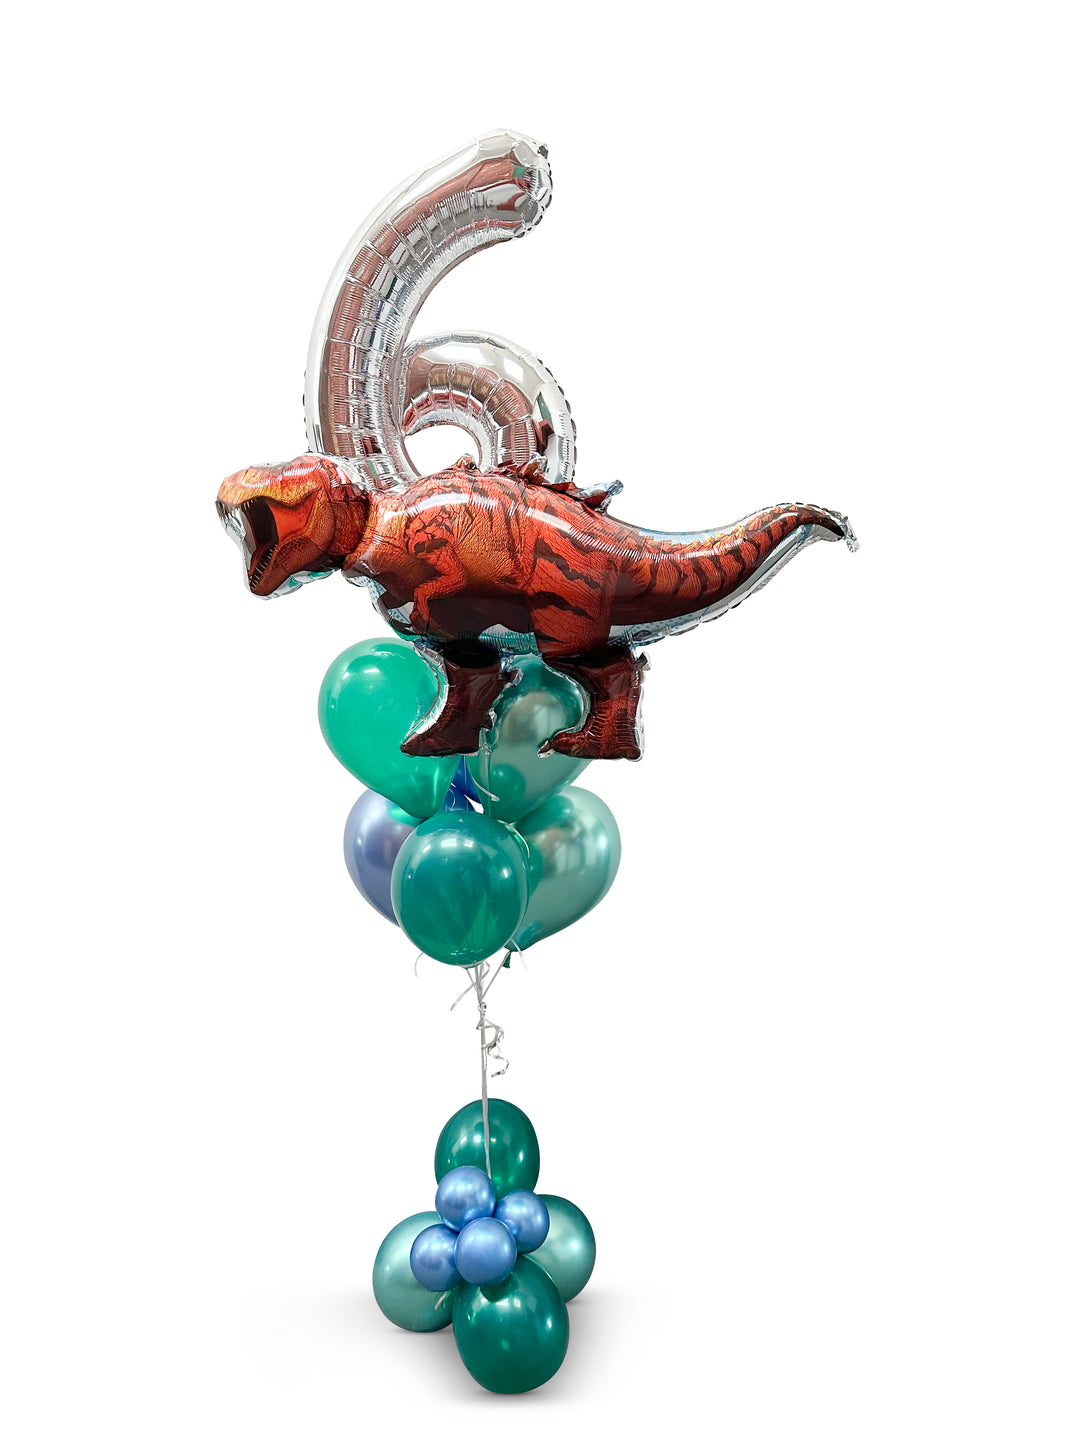 Balloon bouquet with bubble cluster weight and dinosaur